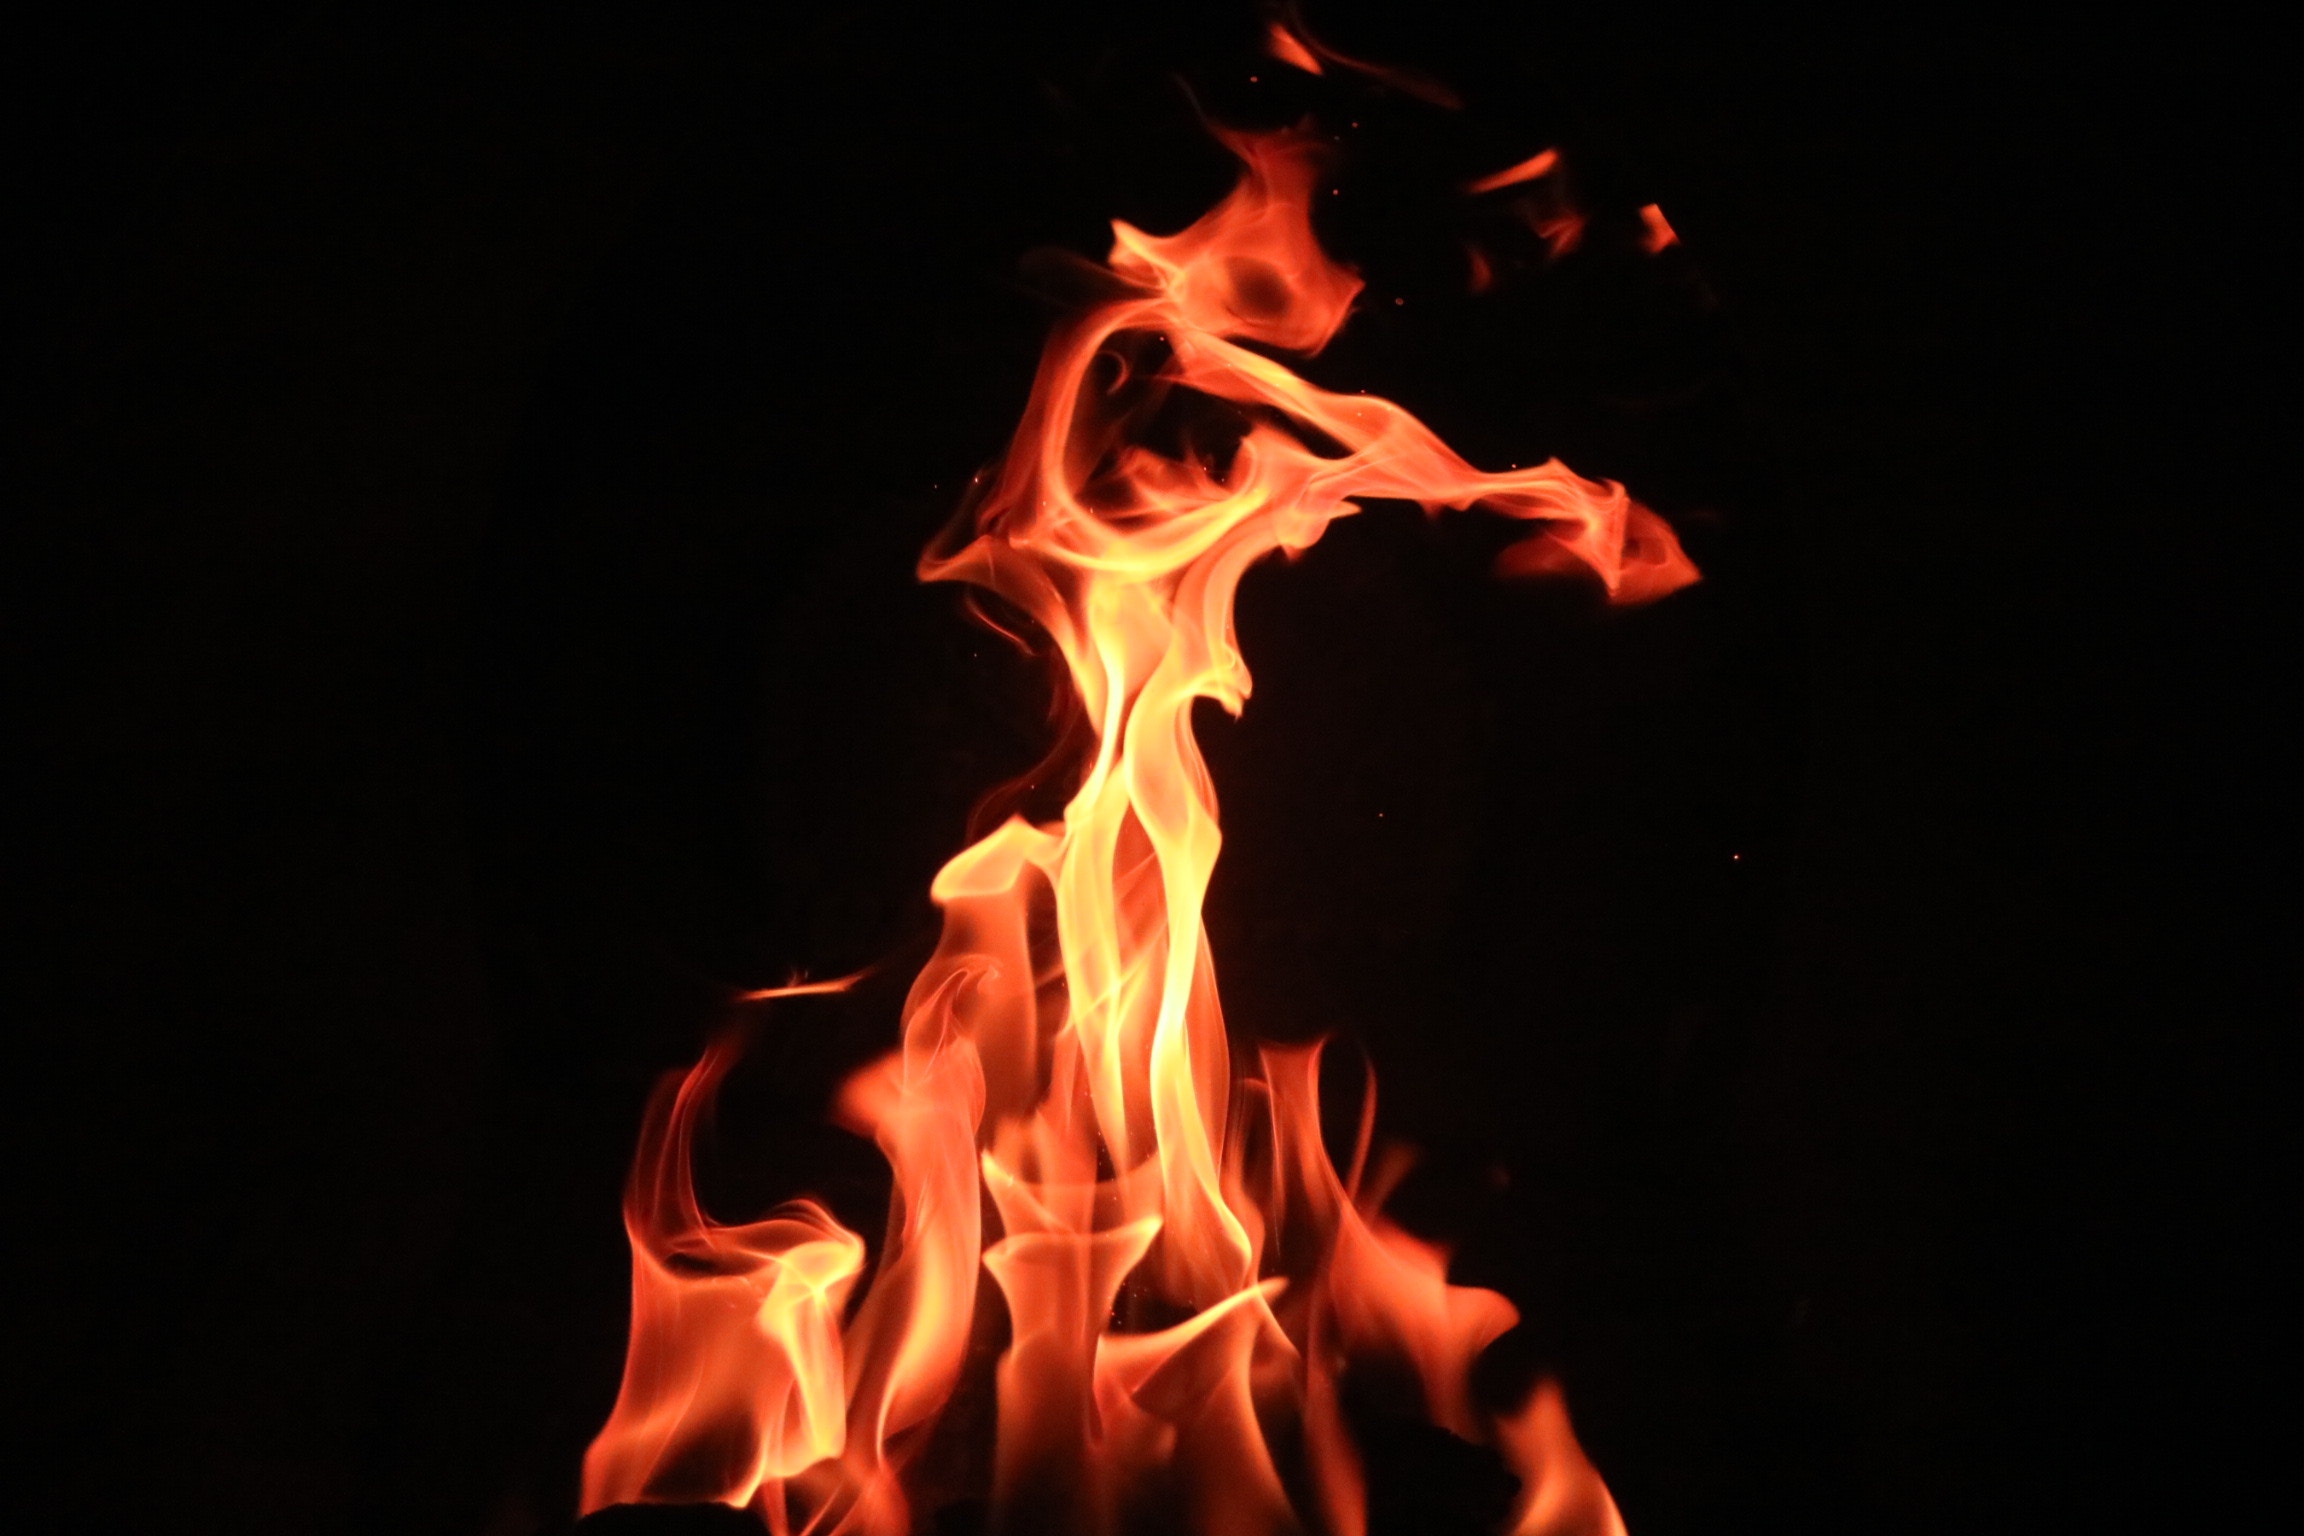 Photo of a flame against a black background